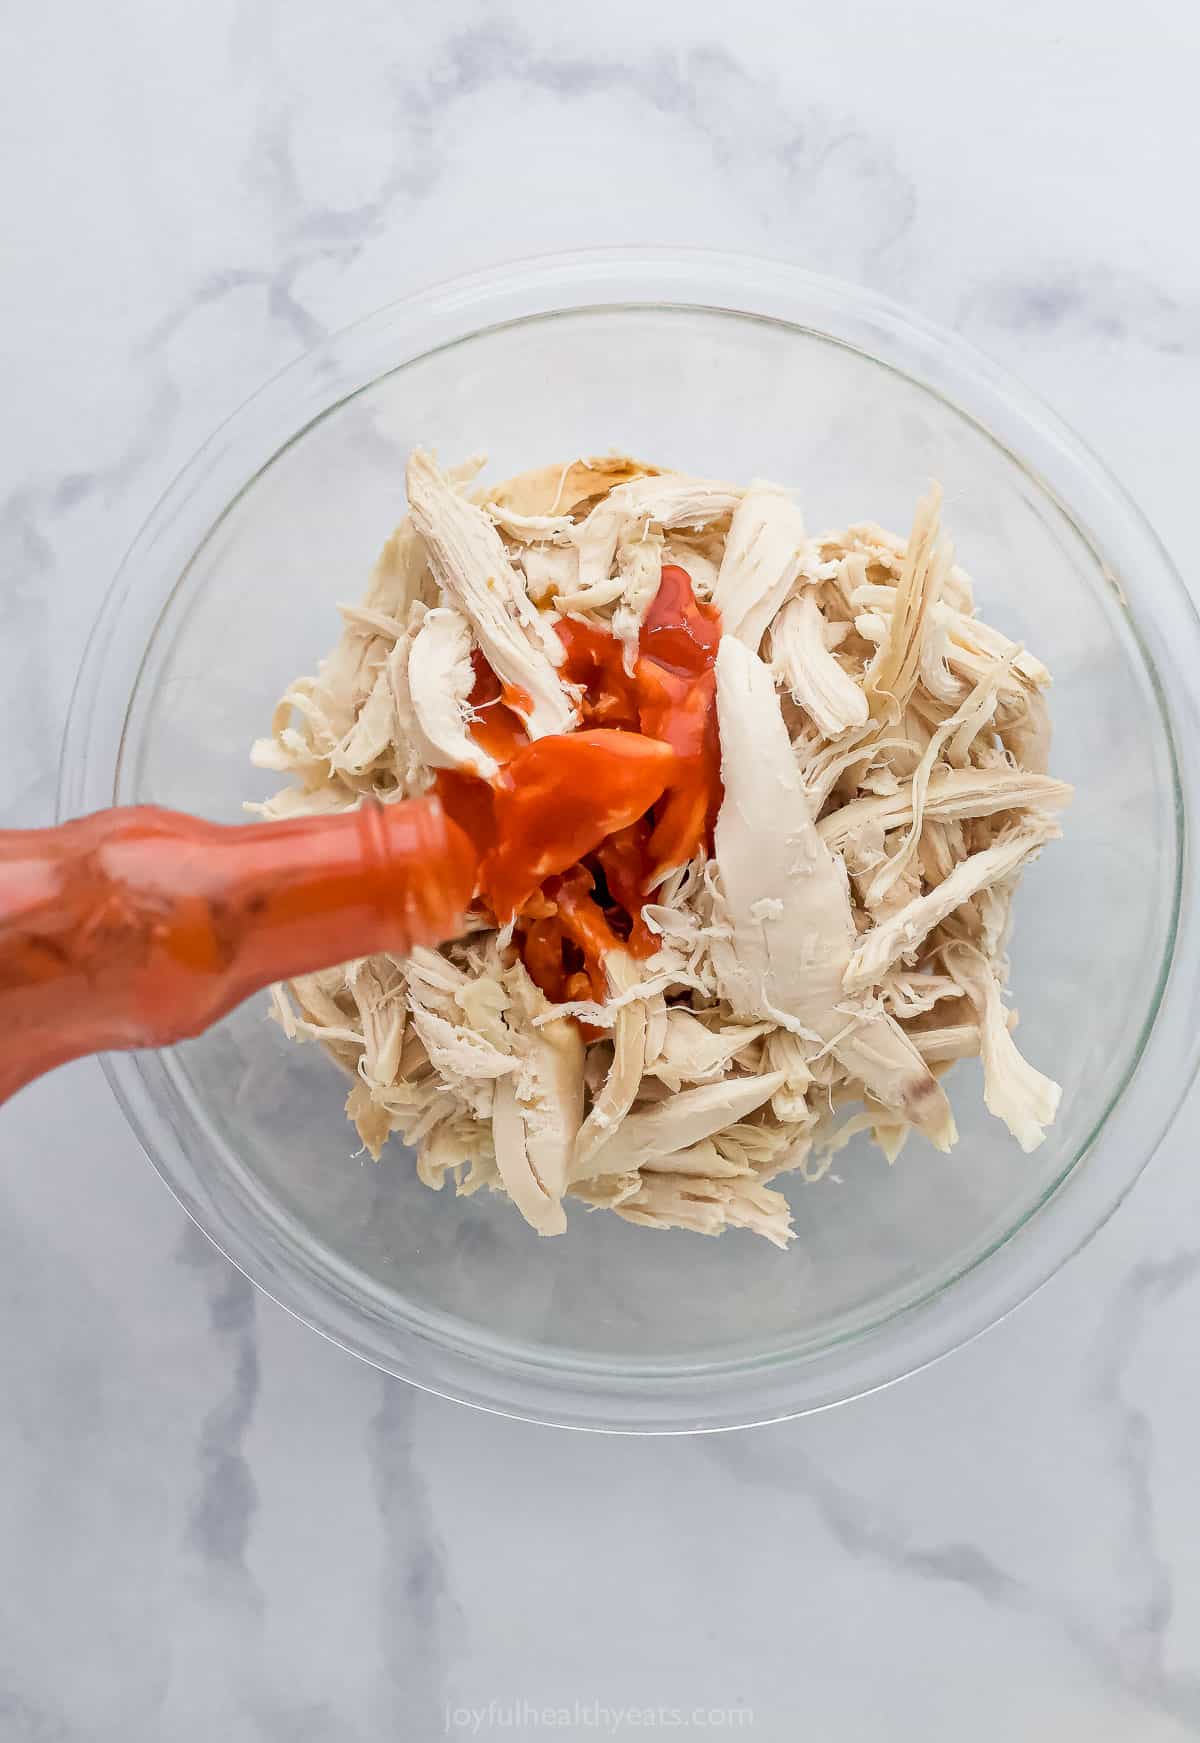 hot sauce being poured on shredded chicken